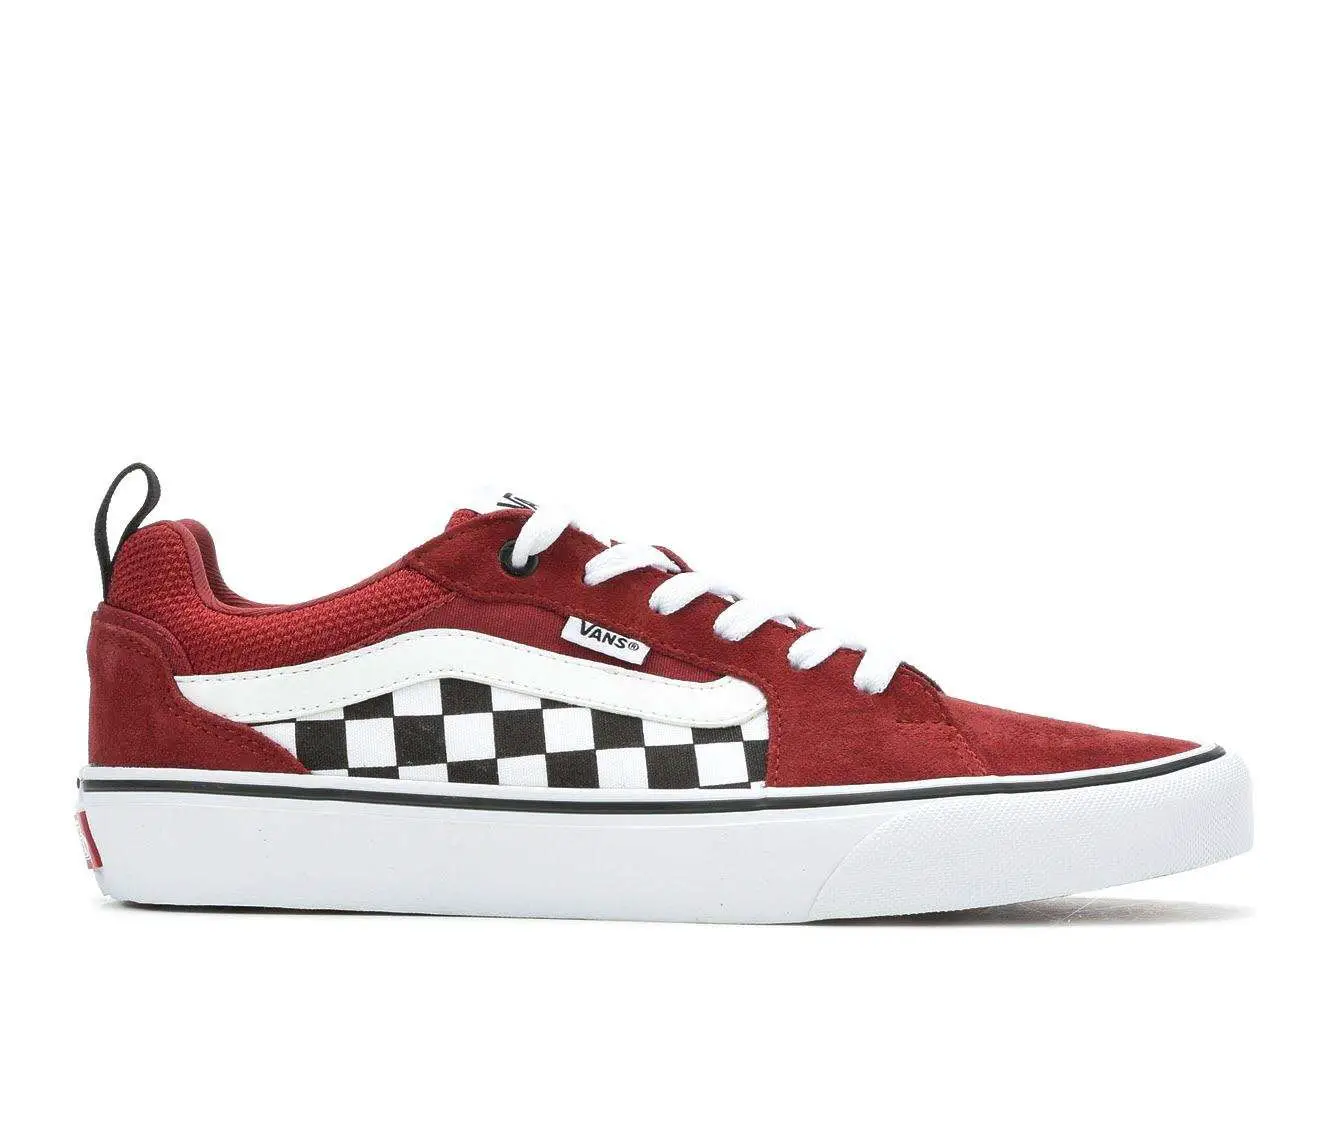 Vans Suede Filmore Athletic Shoe in Red,White Check (Red ...